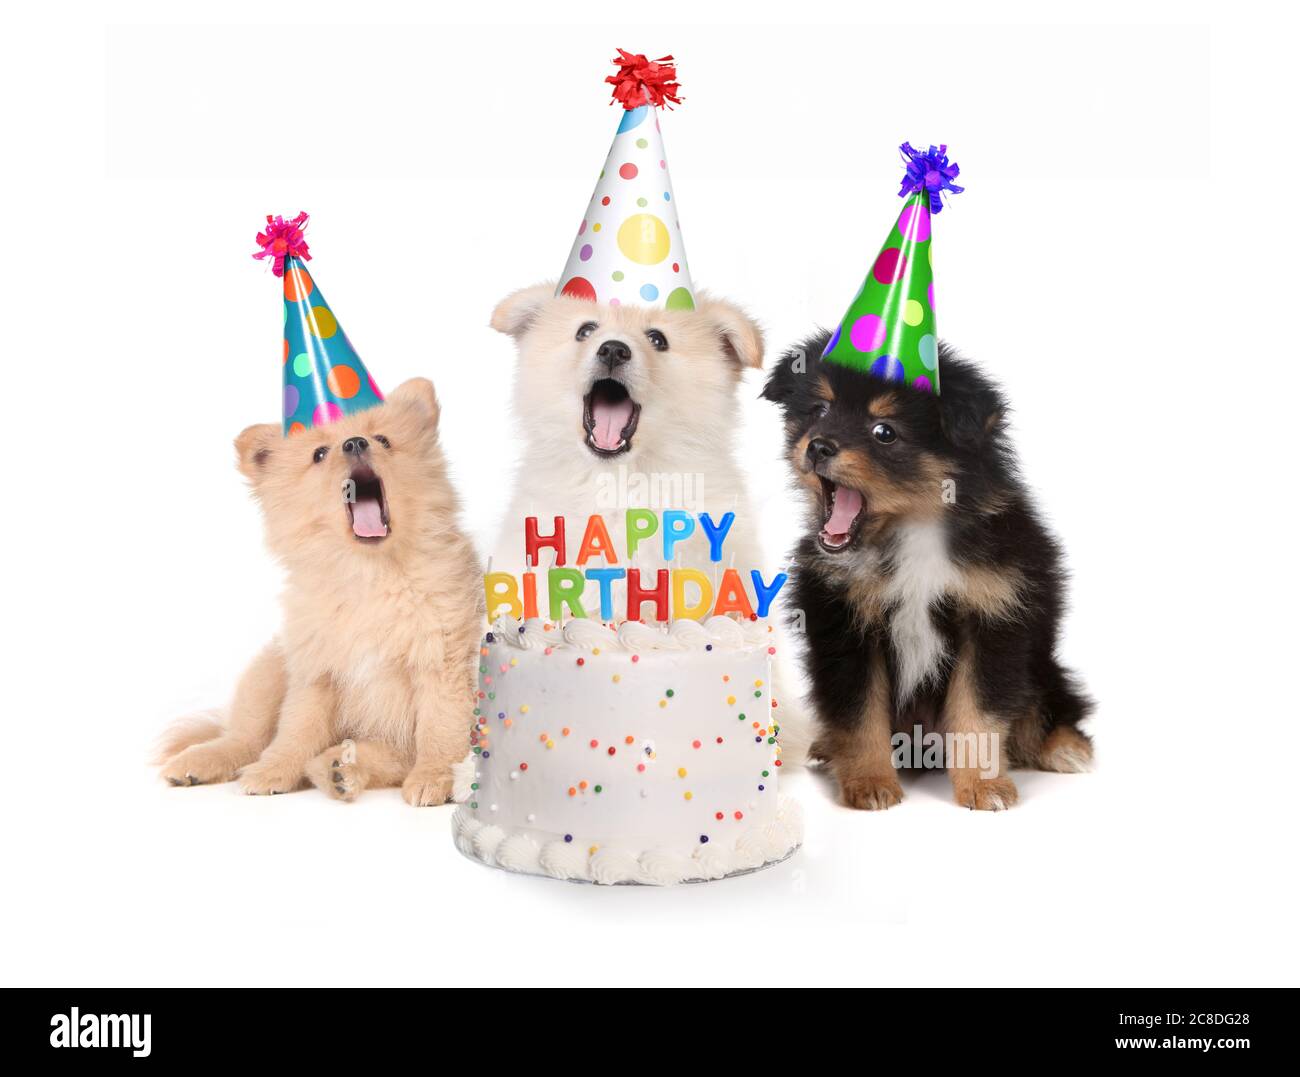 Humorous Puppies Singing Happy Birthday Song With Cake Stock Photo ...